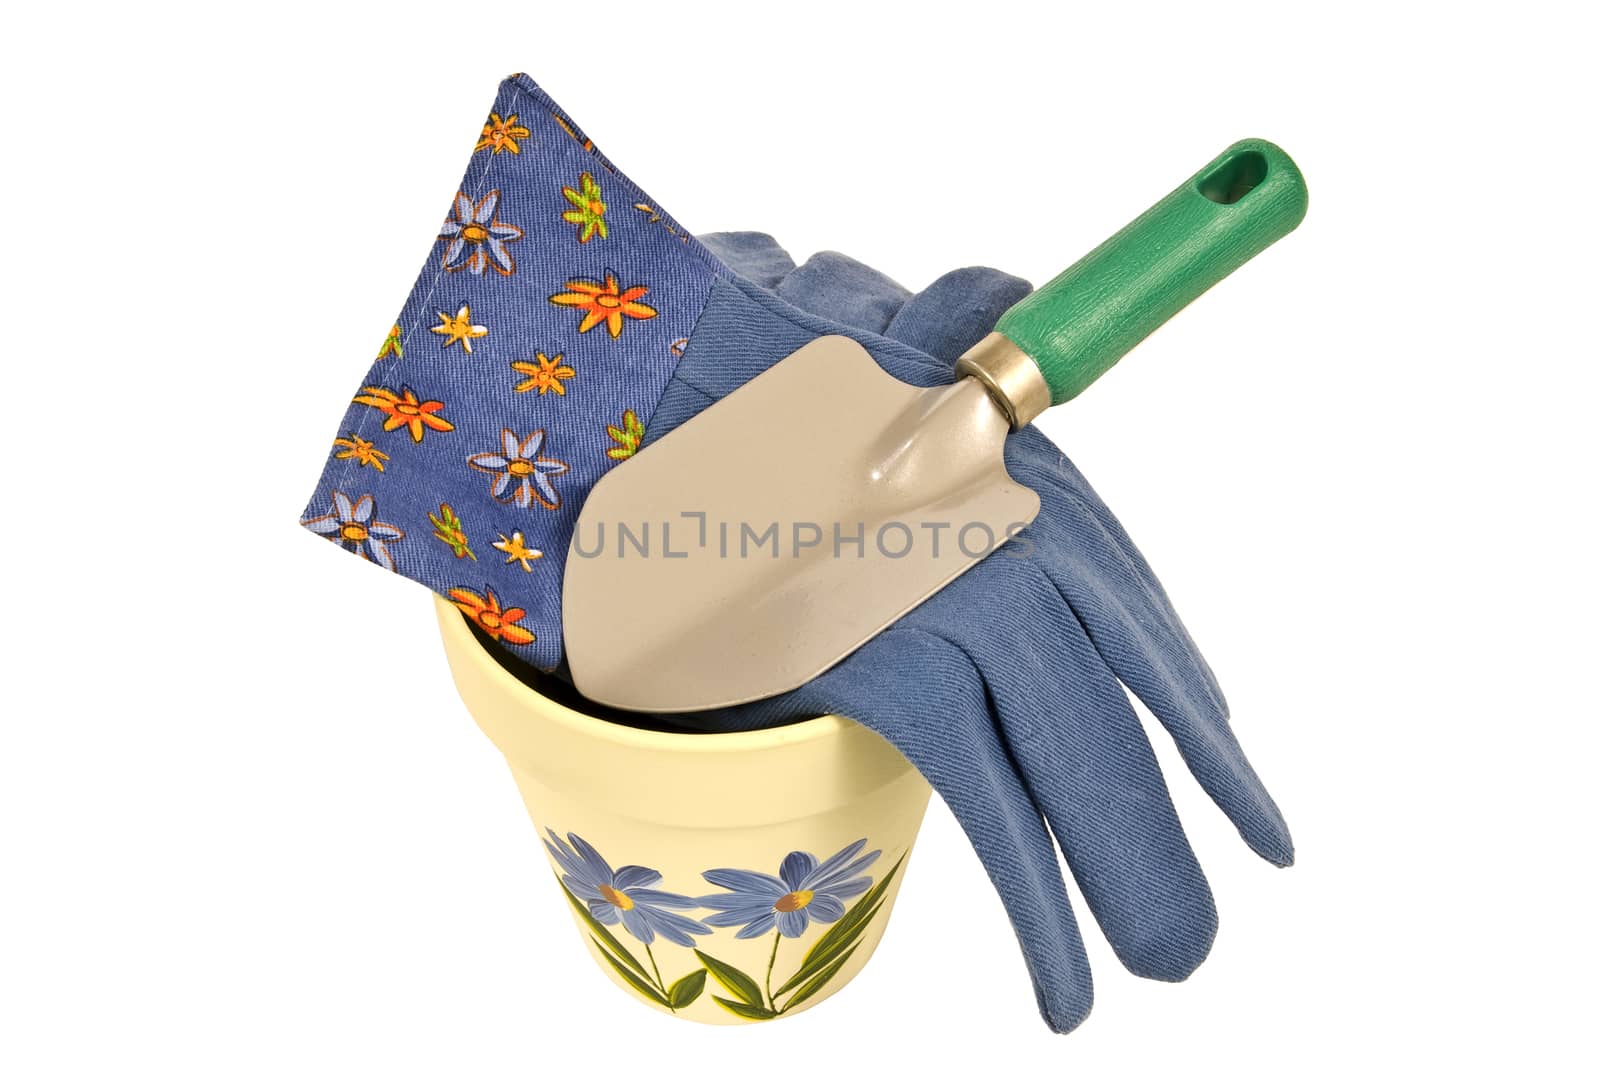 Flower pot, gardening gloves and trowel isolated on white.